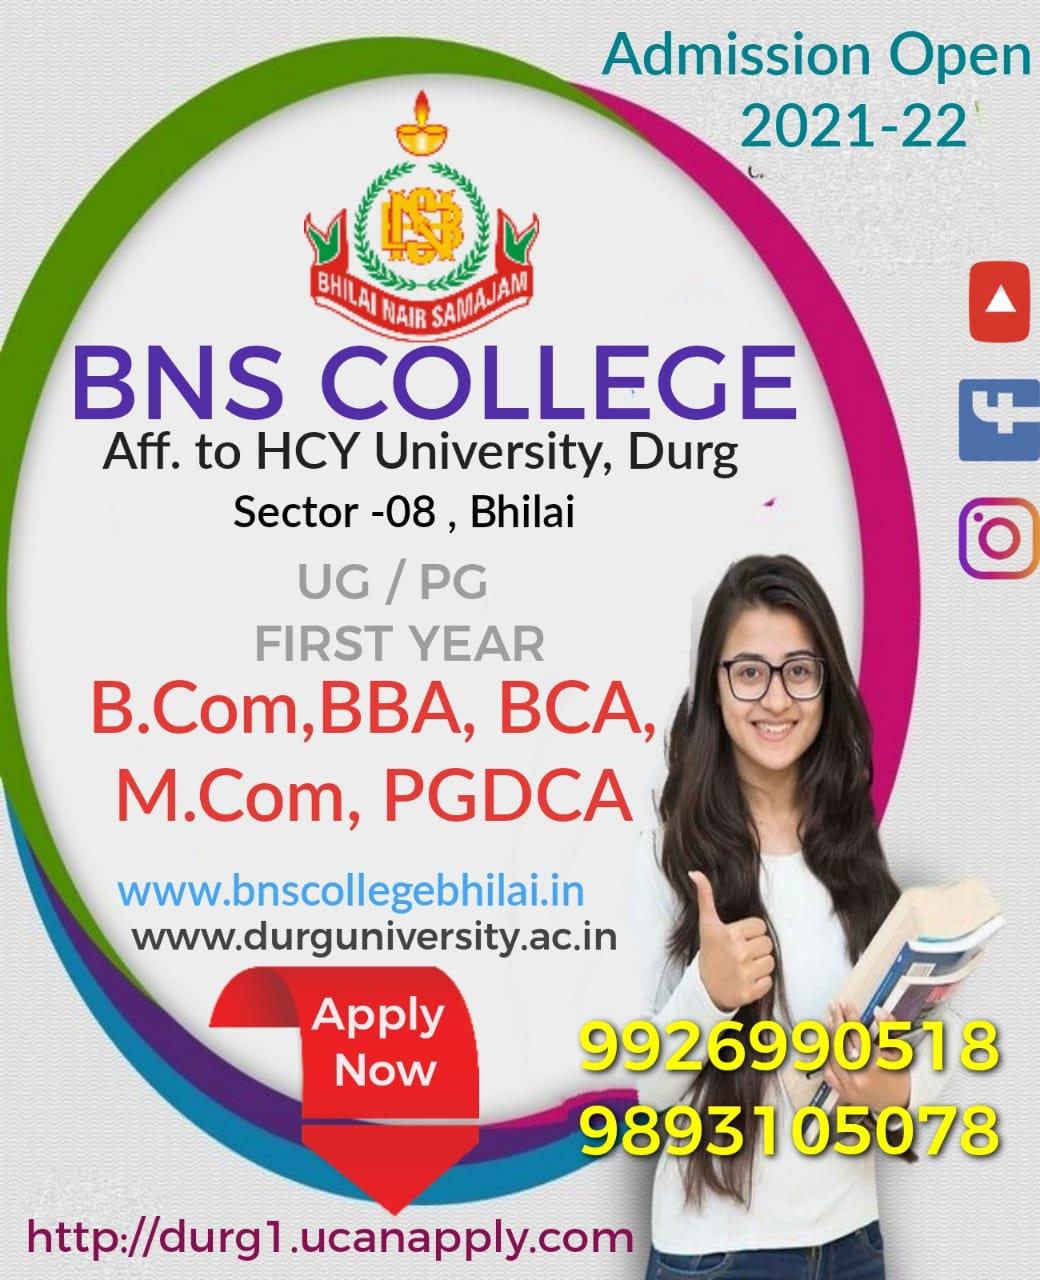 ADMISSION OPEN 